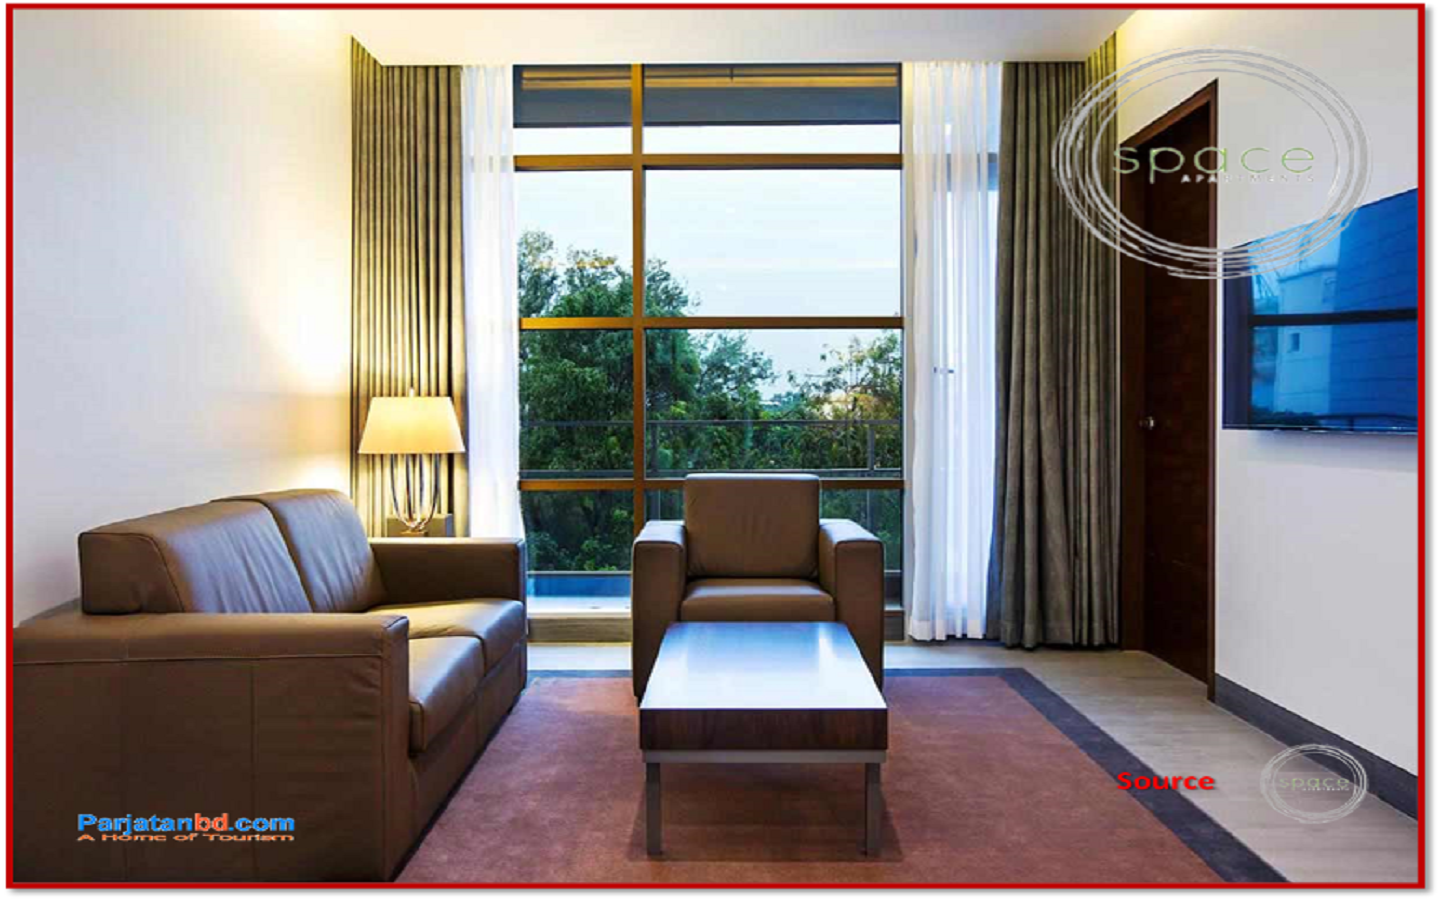 Room Deluxe Apartments -1, Space Apartments, Gulshan 2